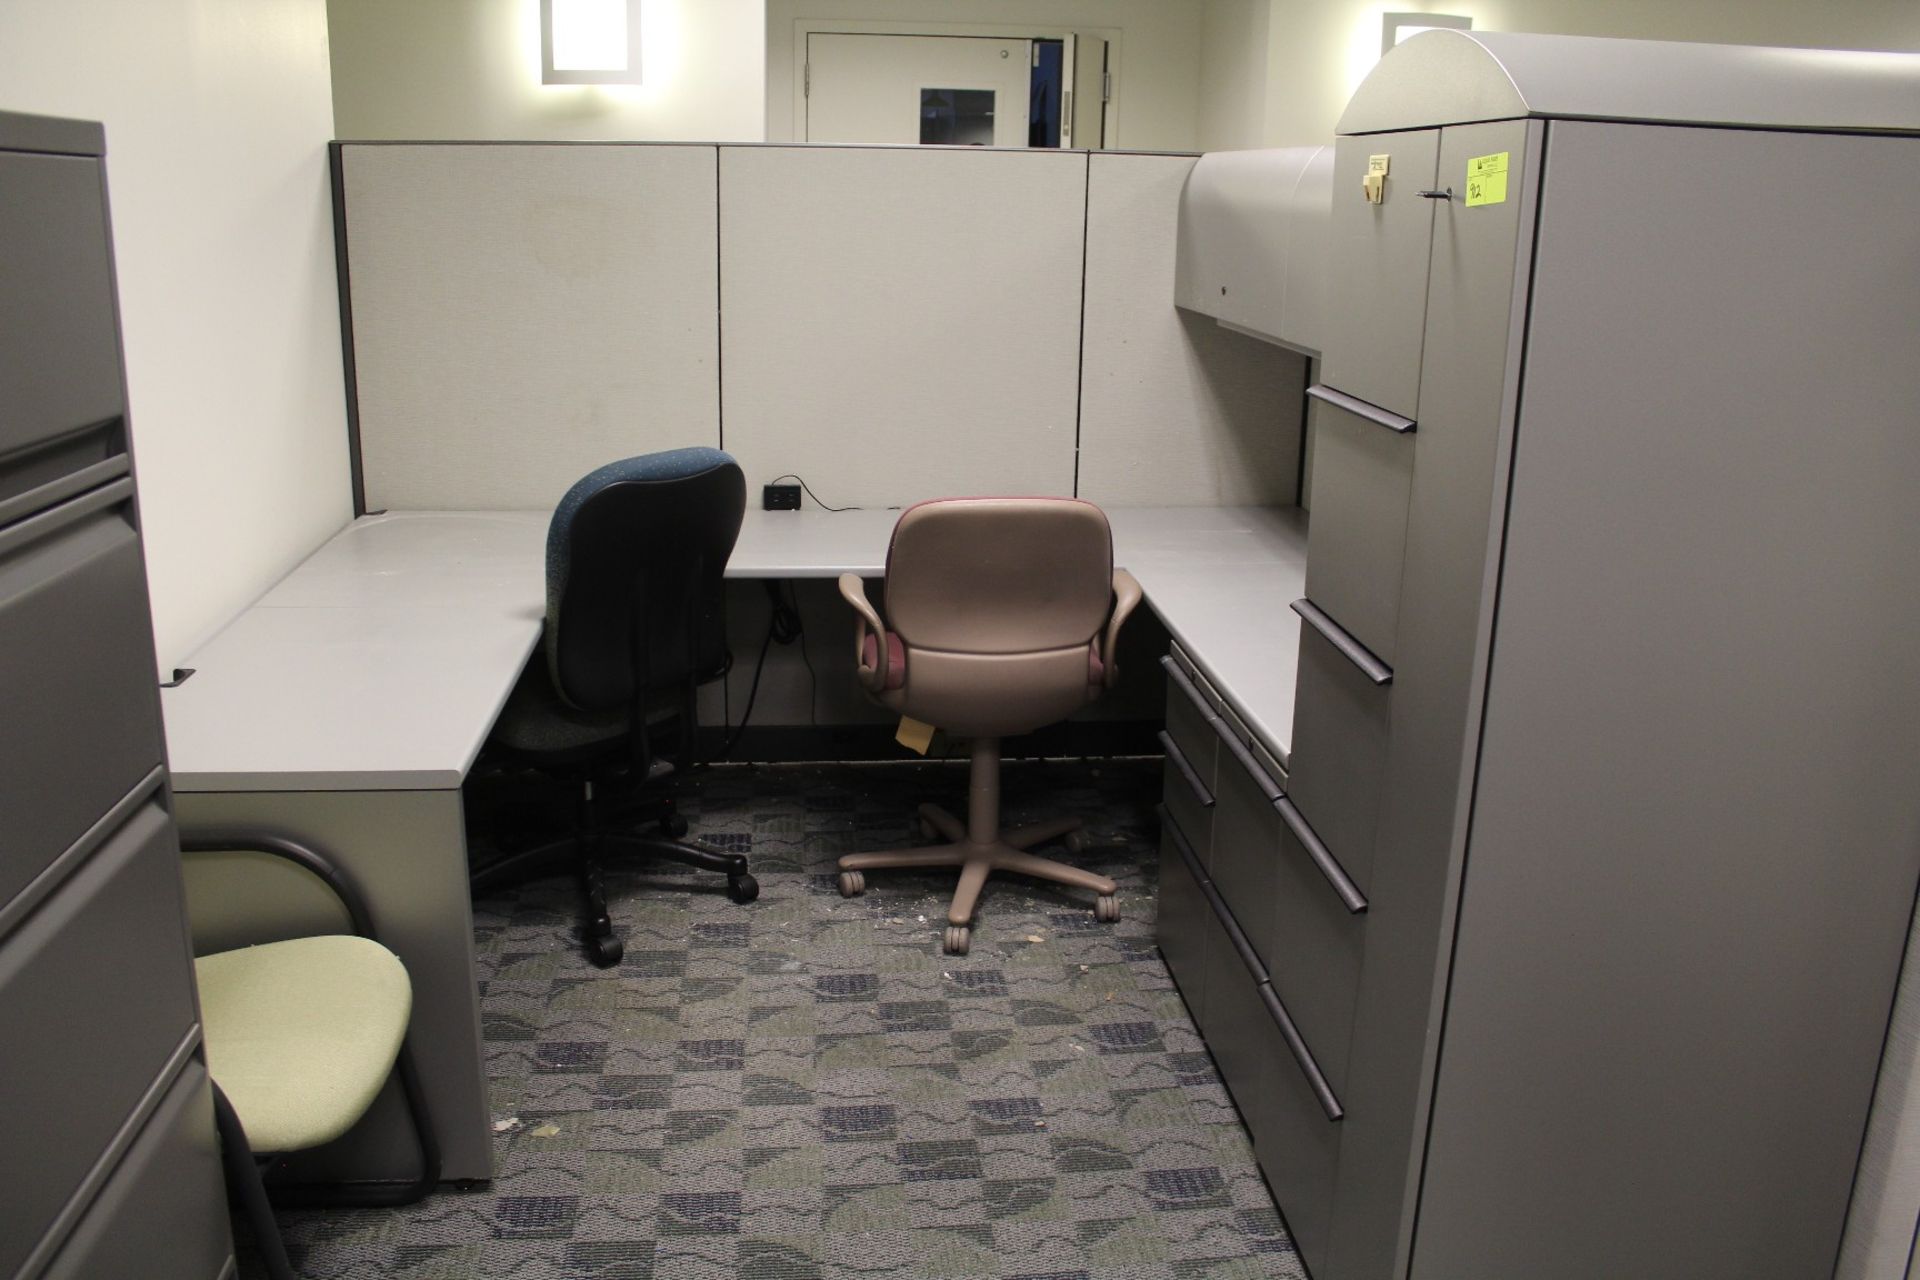 Cubicle Office System, W/ (3) Work Stations, Chairs, File Cabinets, Storage Cabinets & Cubicle Walls - Bild 4 aus 5